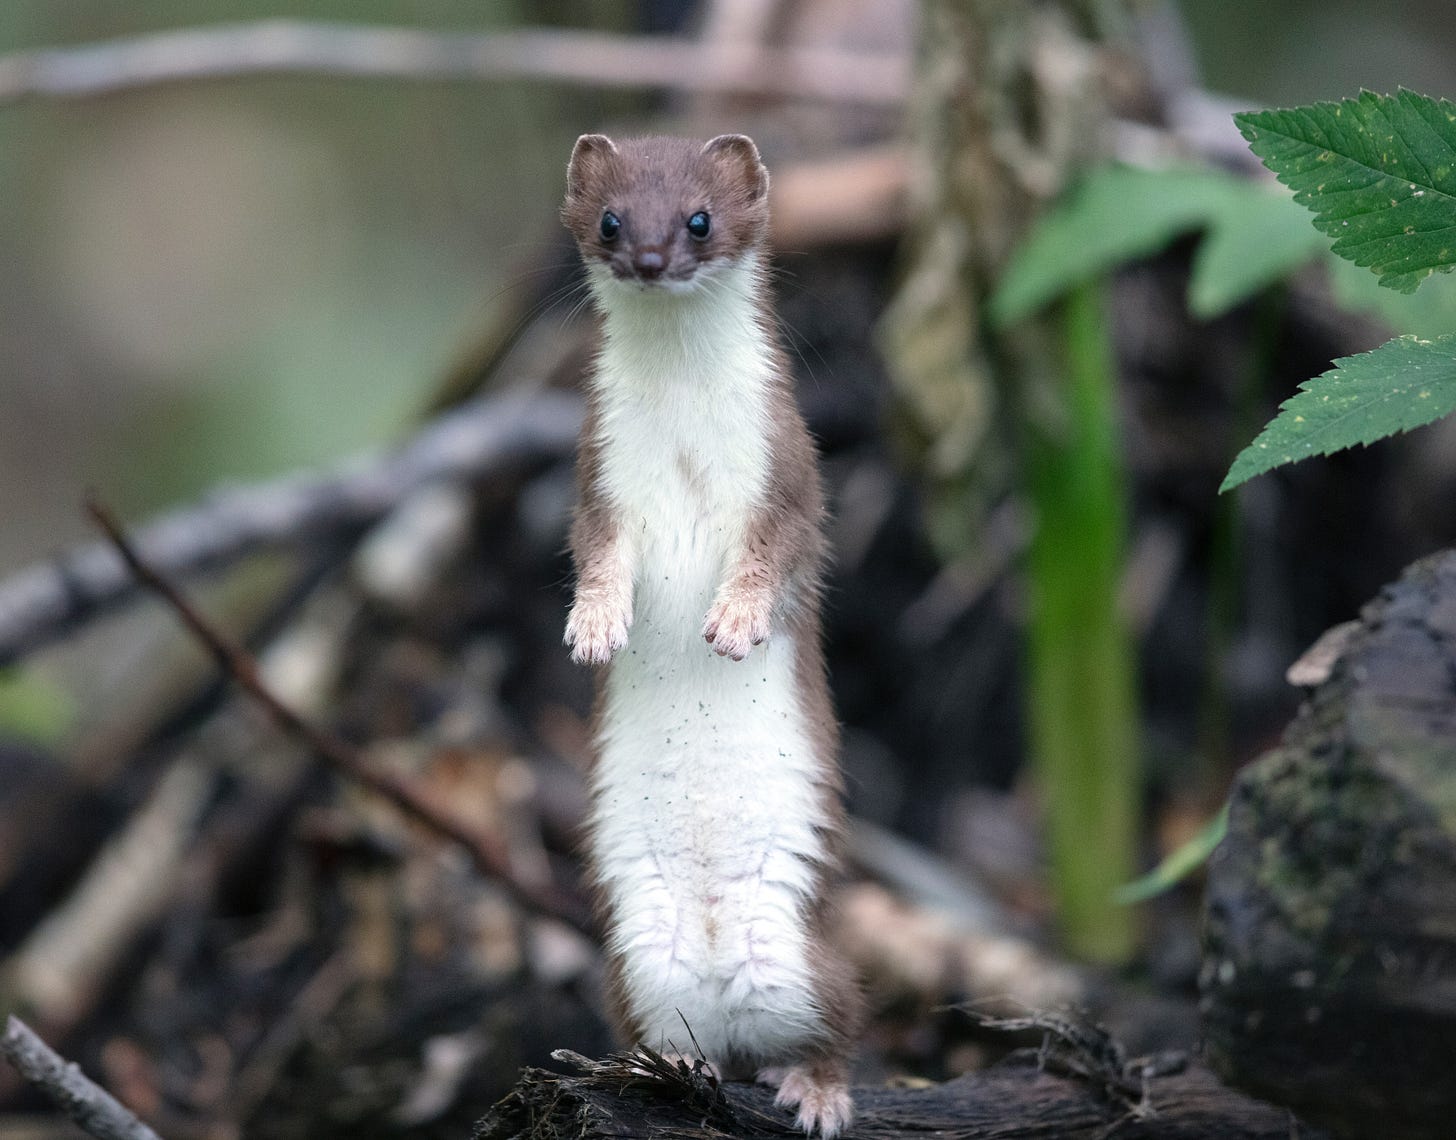 A brown weasel with a white belly and paws standing on its hind legs and looking adorable